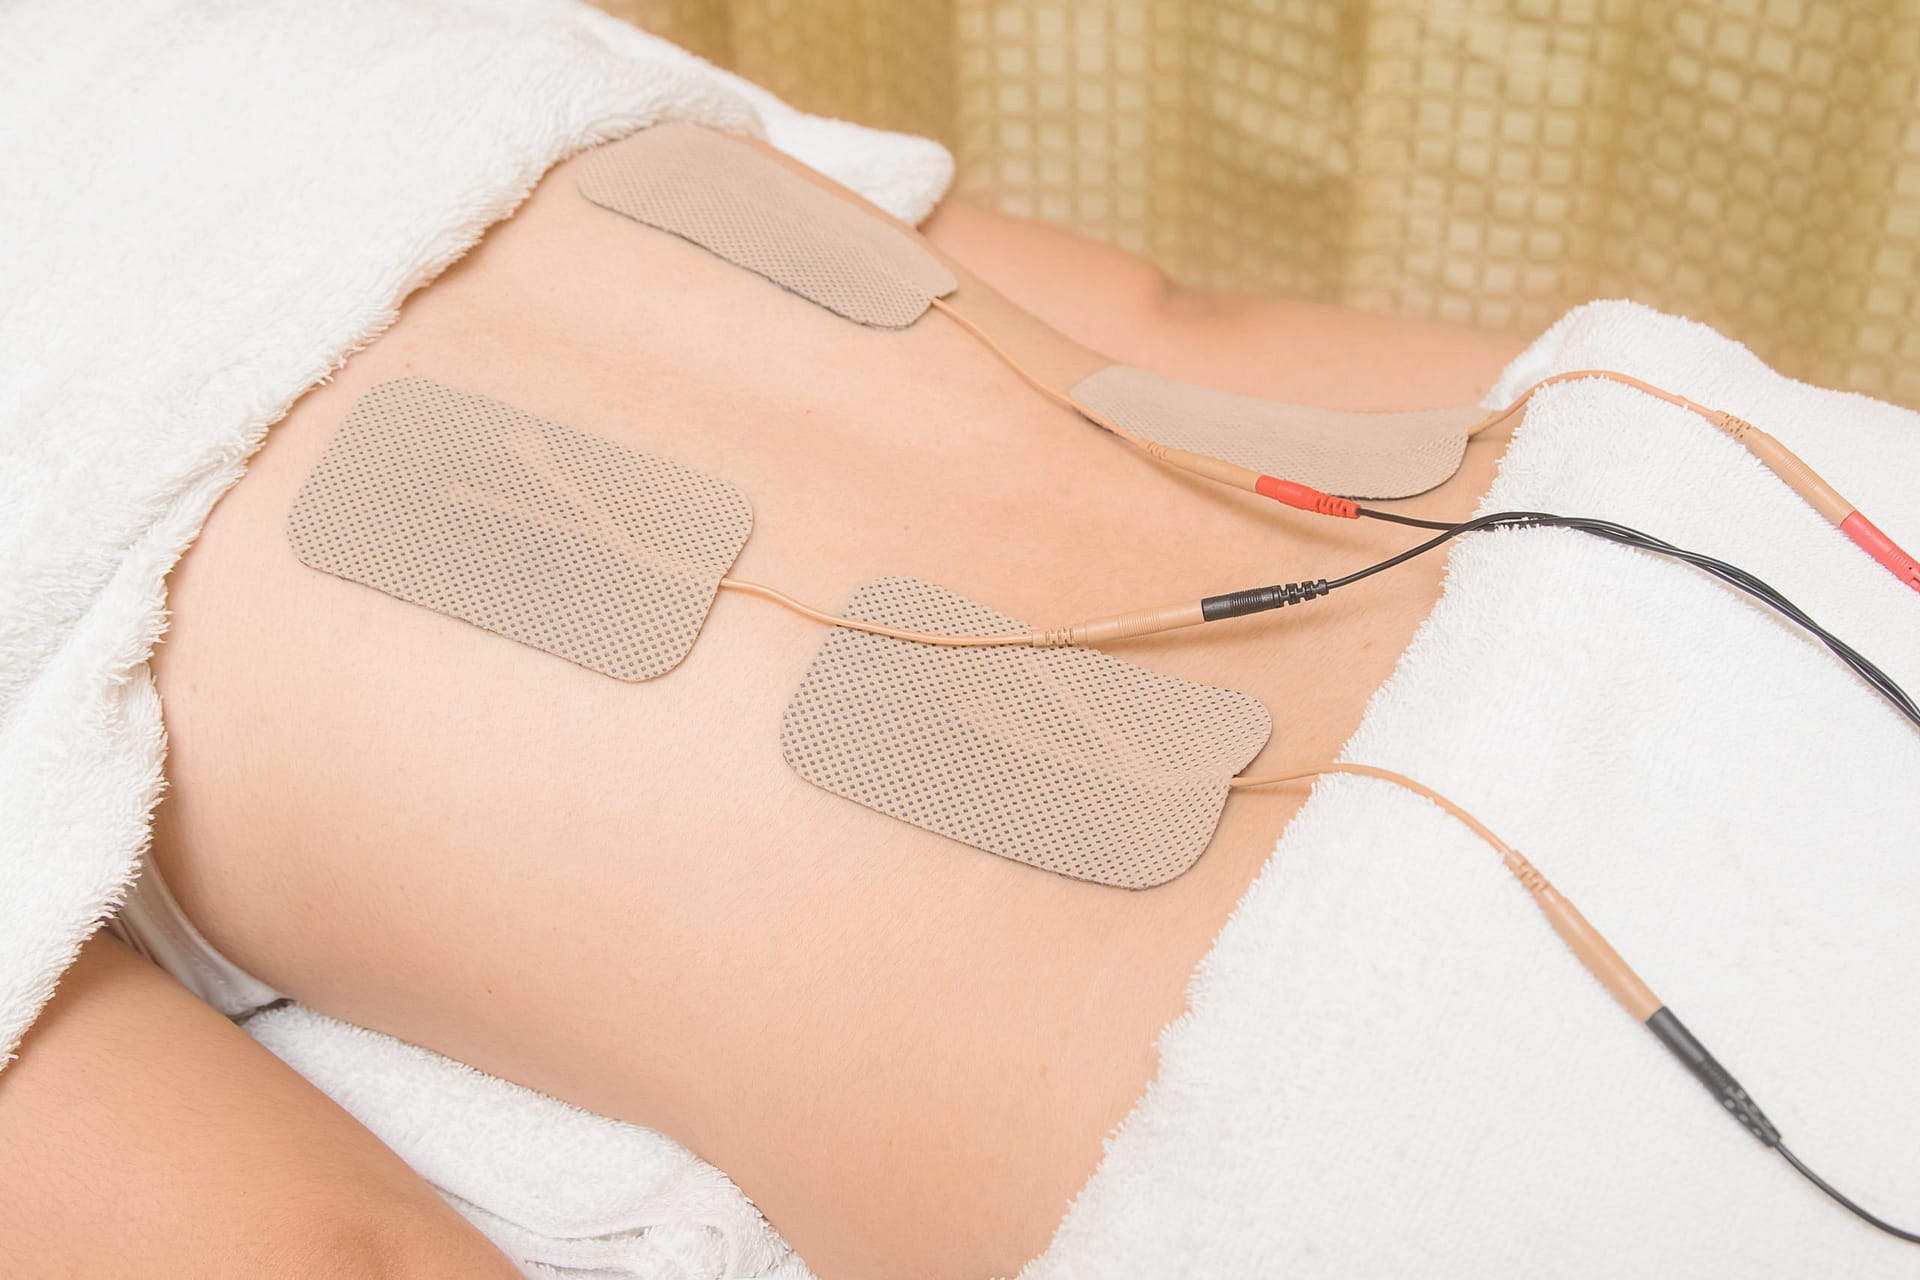 Electrical Muscle Stimulation, Pulse Chiropractic